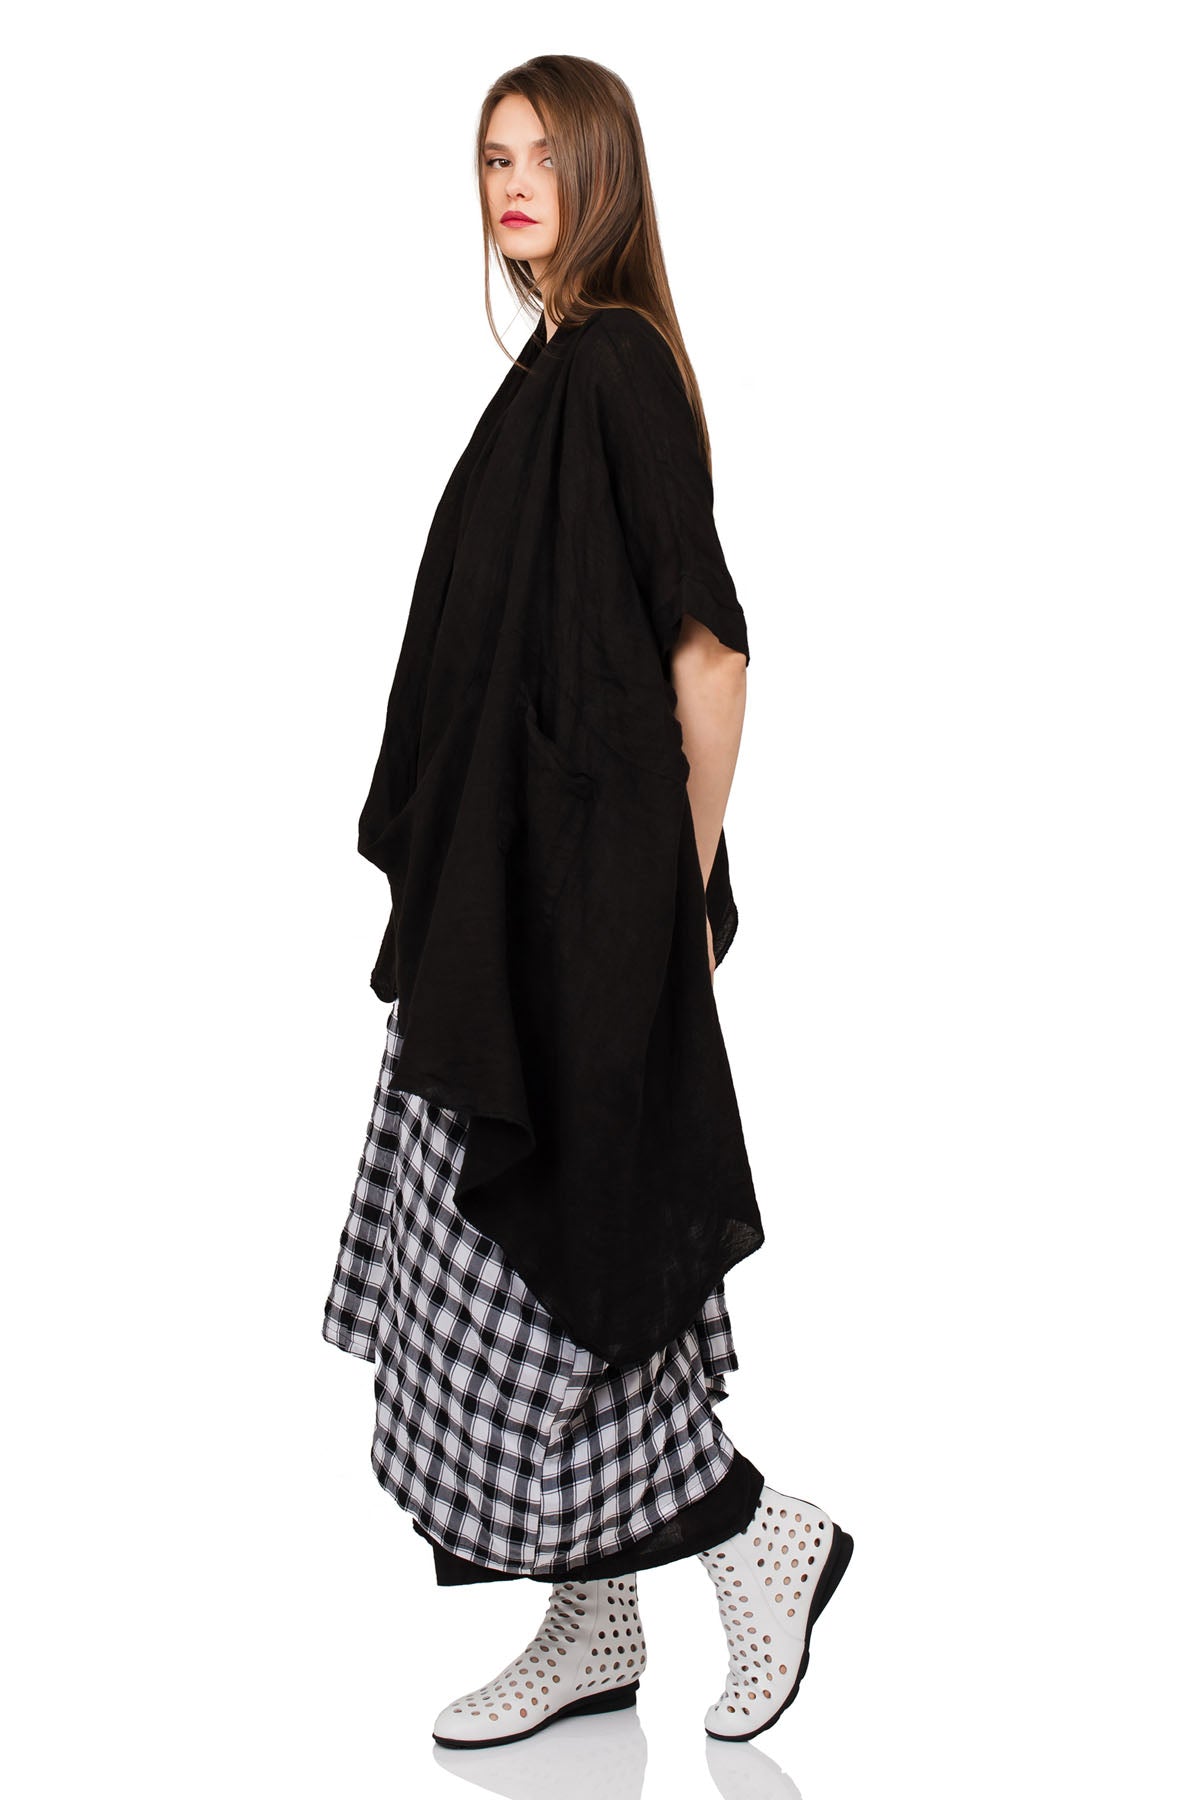 Chic & Simple Combination Combination Megan Blouse, Kali Dress & Nora Pants - Black and Black and White Check